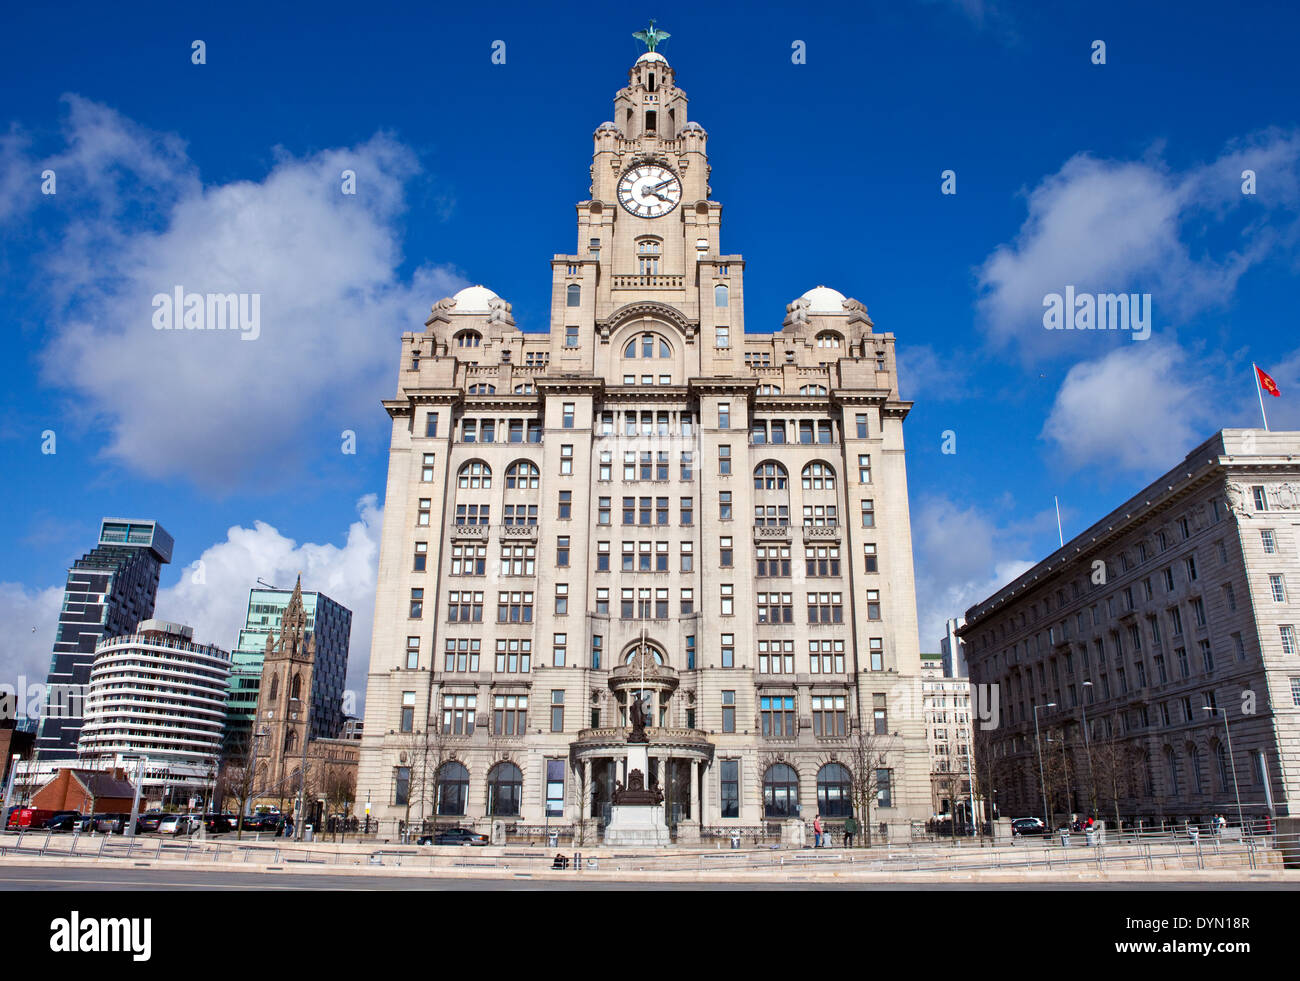 The historic Royal Liver Building in Liverpool, England. Stock Photo